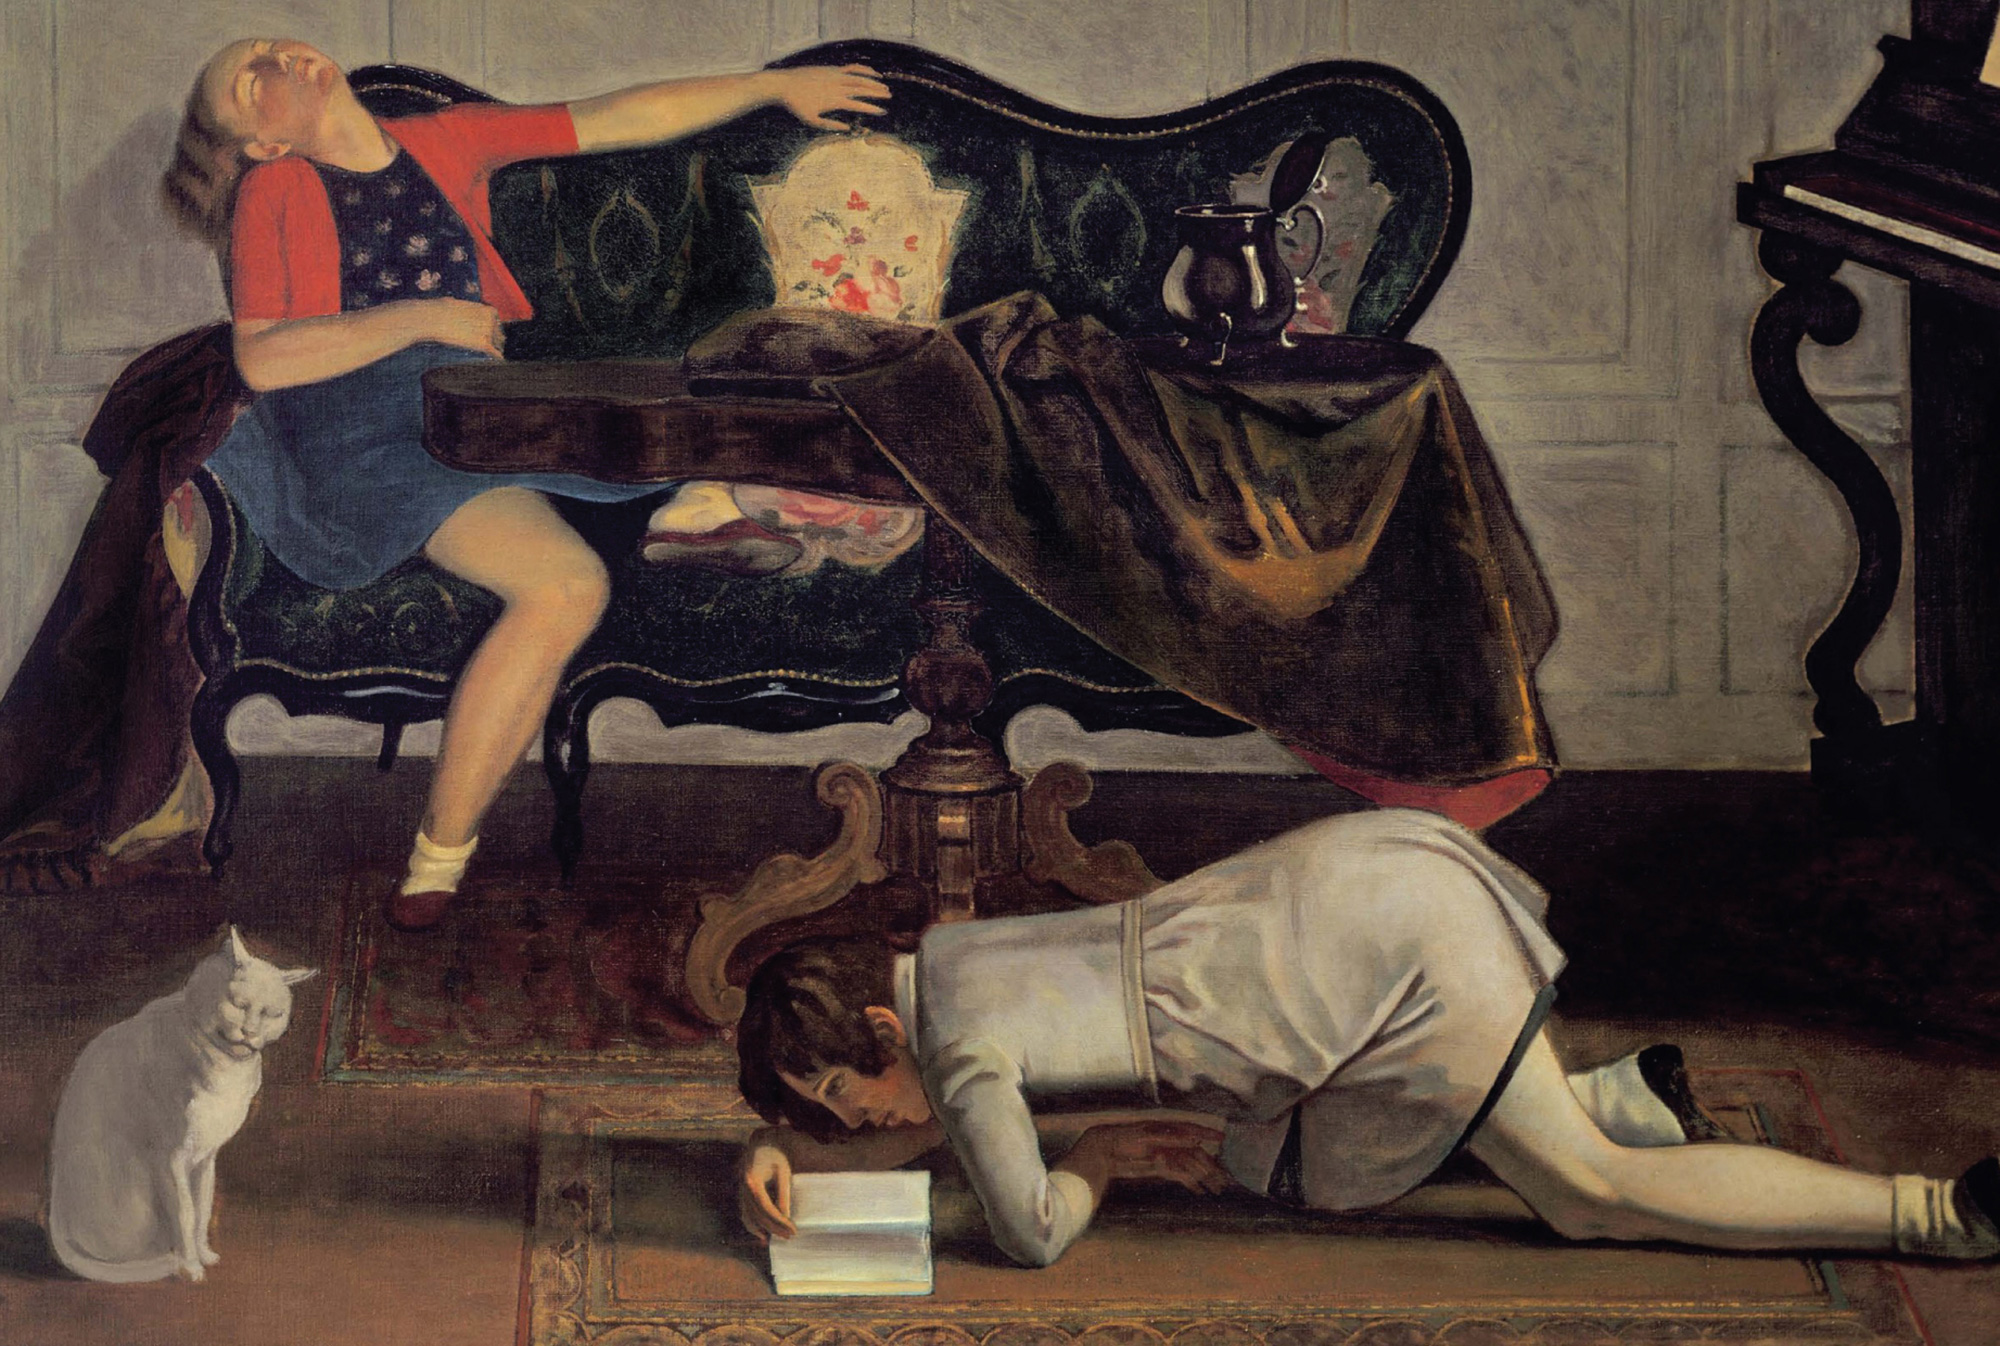 Balthus’s nineteen forty-two painting of a boy reading and a woman and her cat napping, titled “The Living Room”